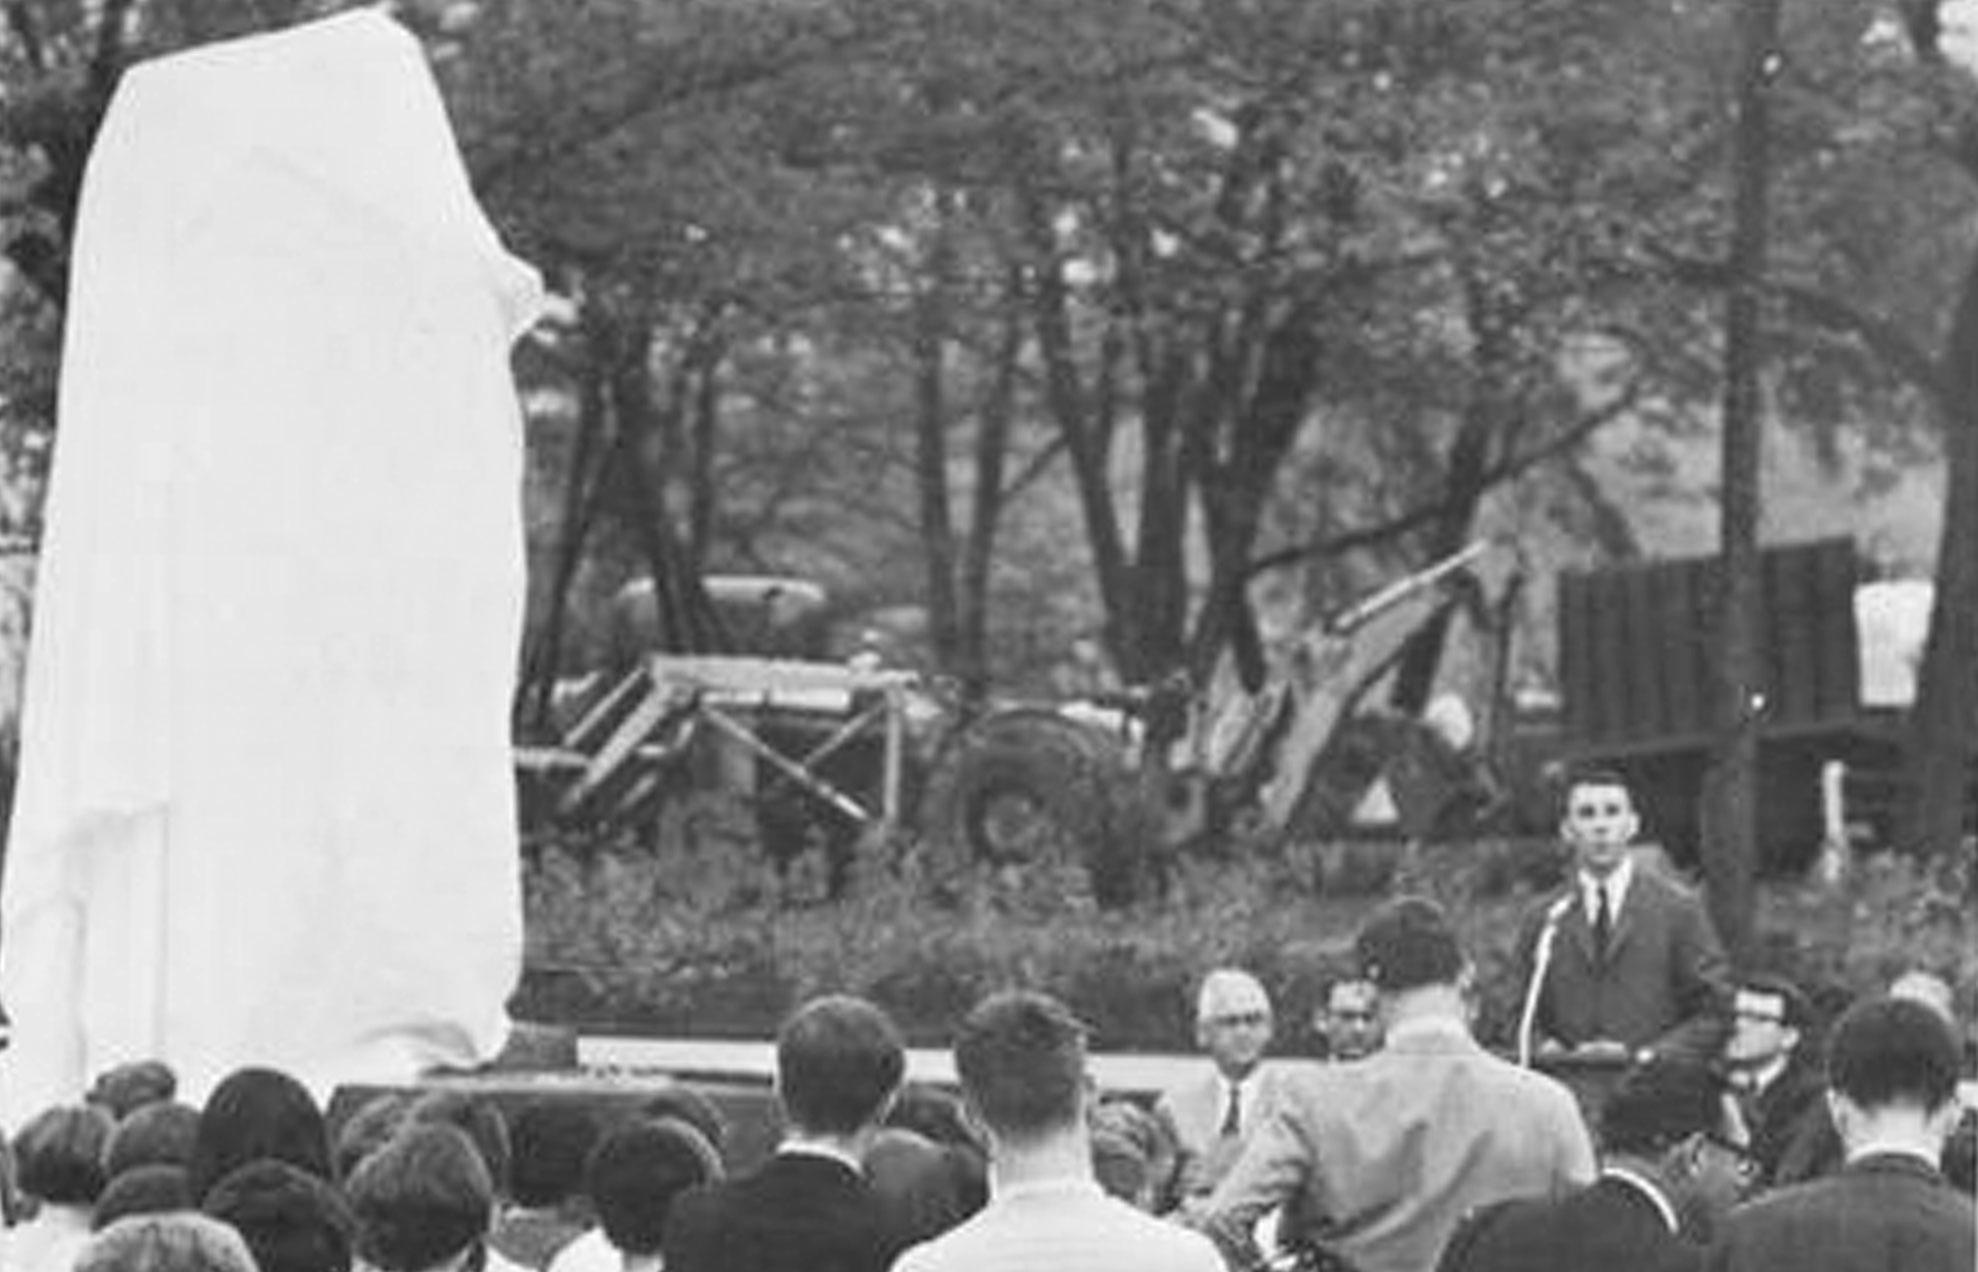 Preparing to unveil the Torchbearer on April 19, 1968